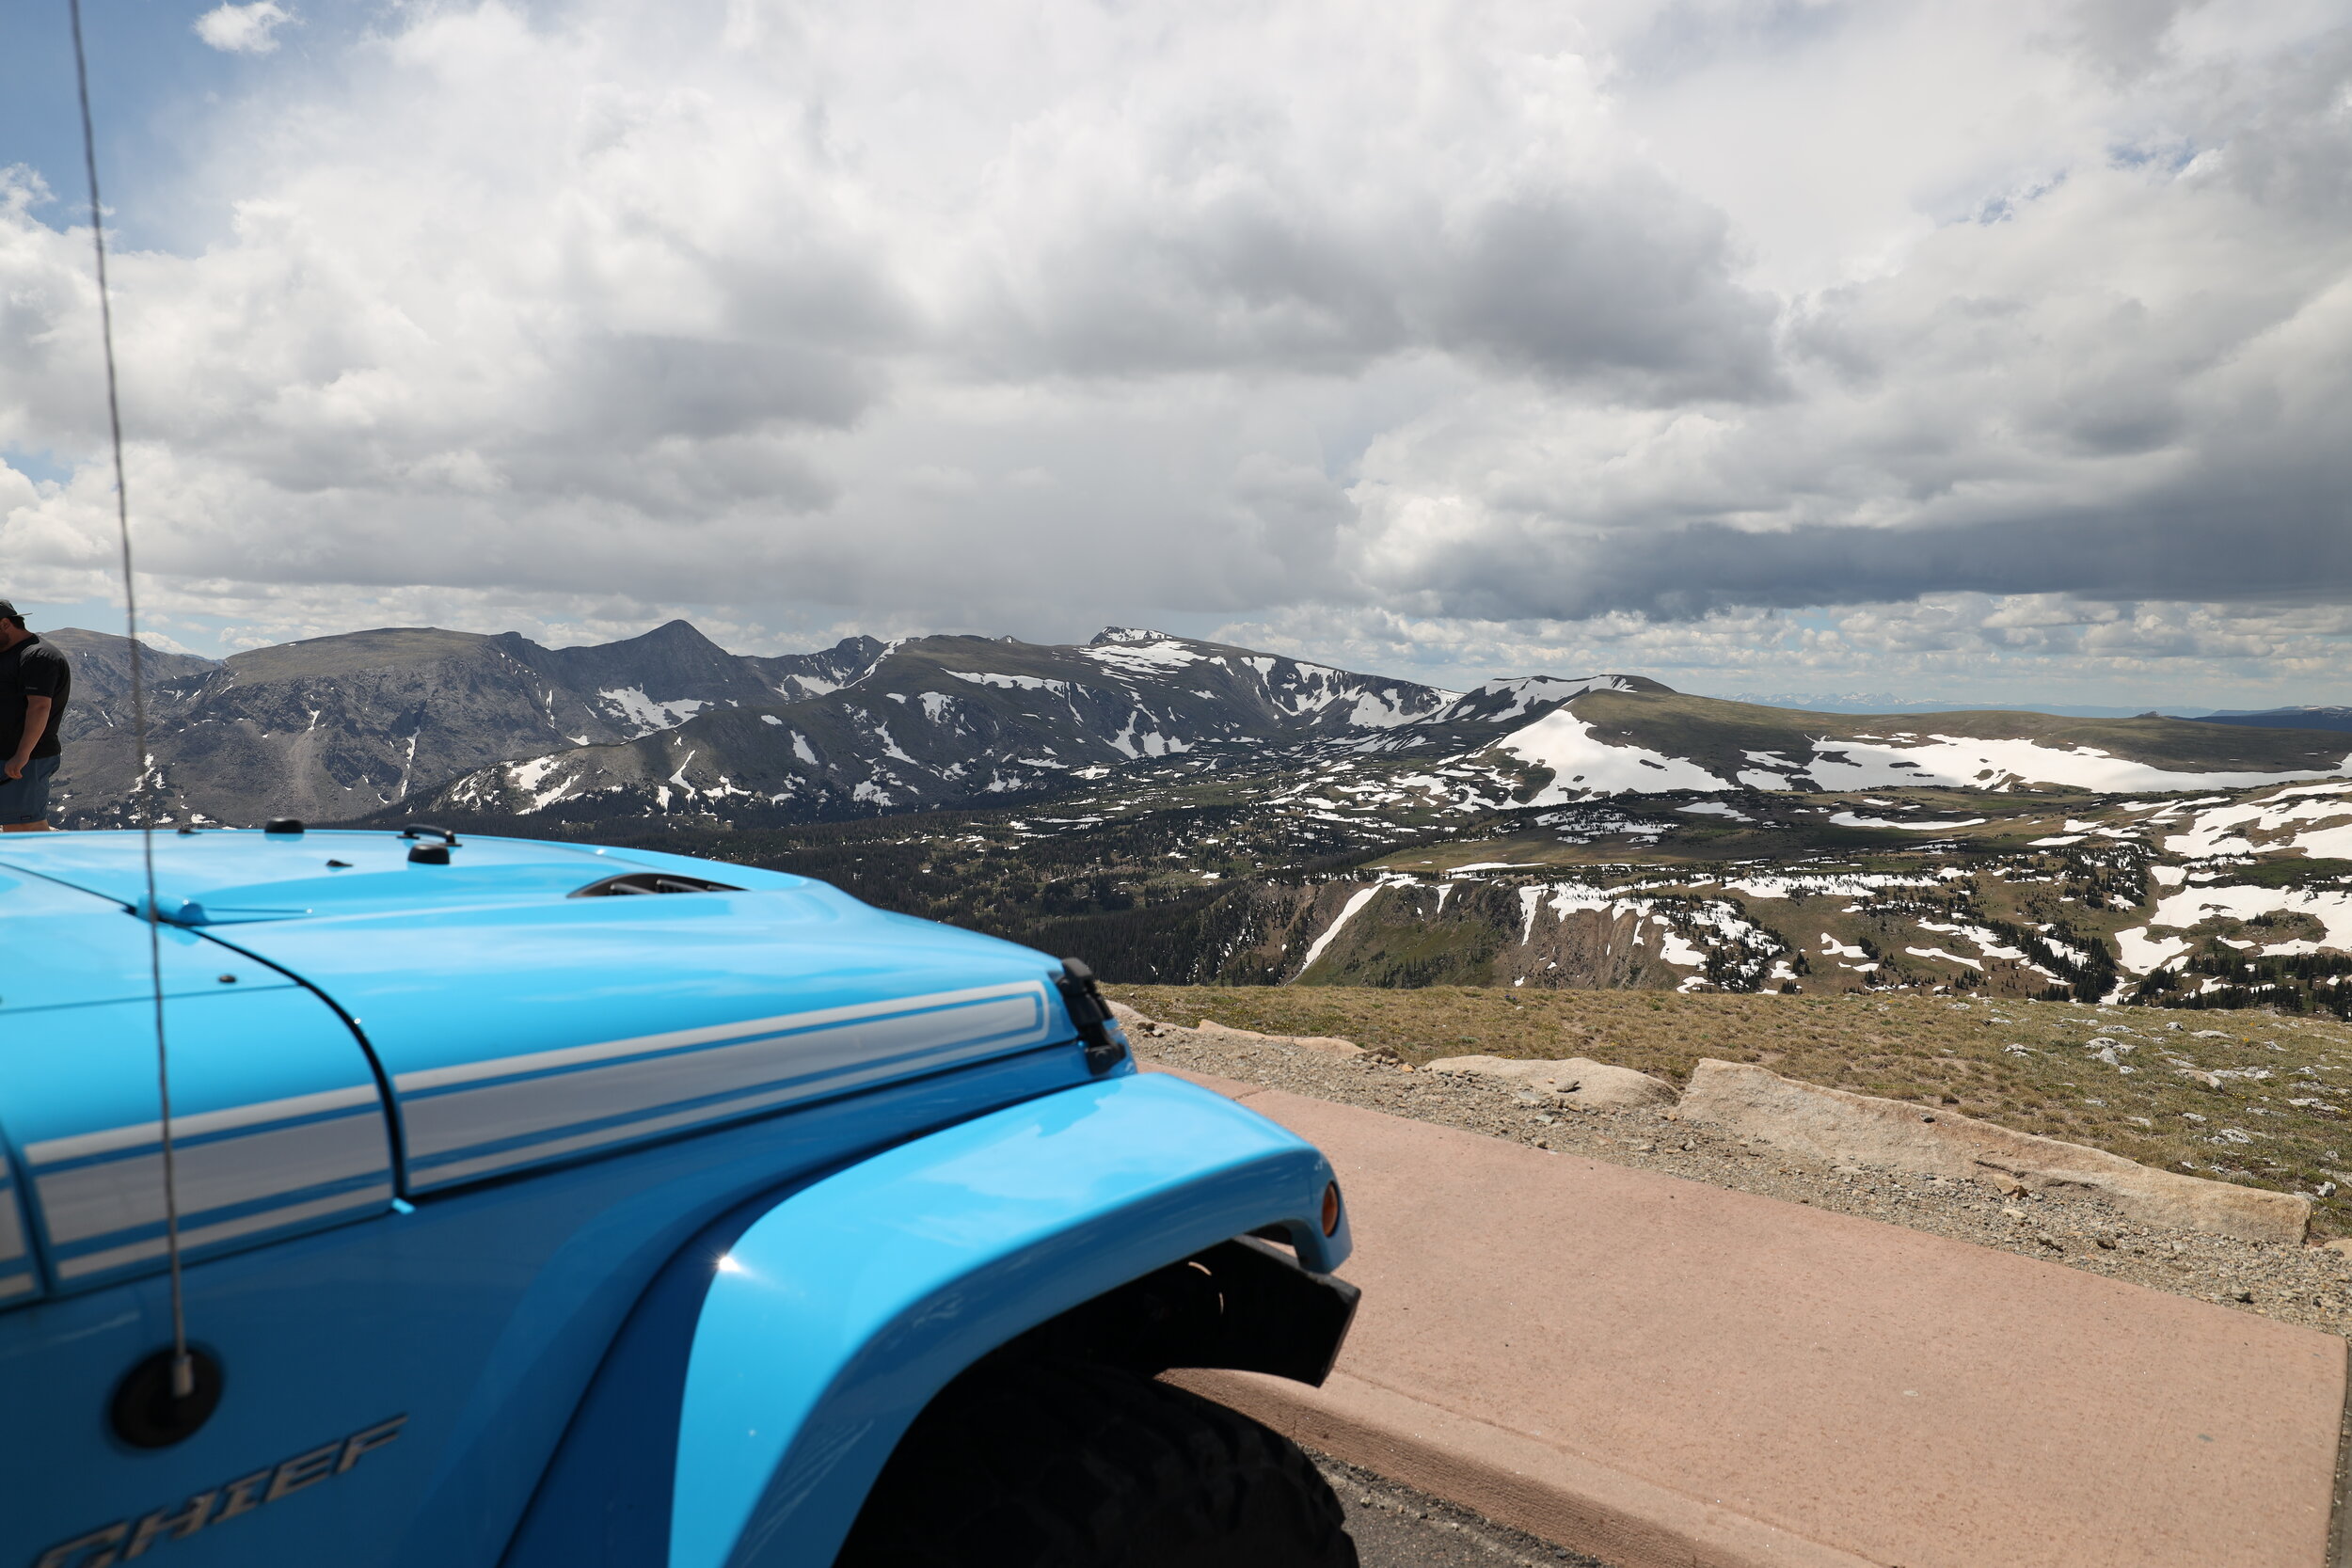 Skyblue Overland on Trail Ridge Road in Rocky Mountain National Park, Colorado.